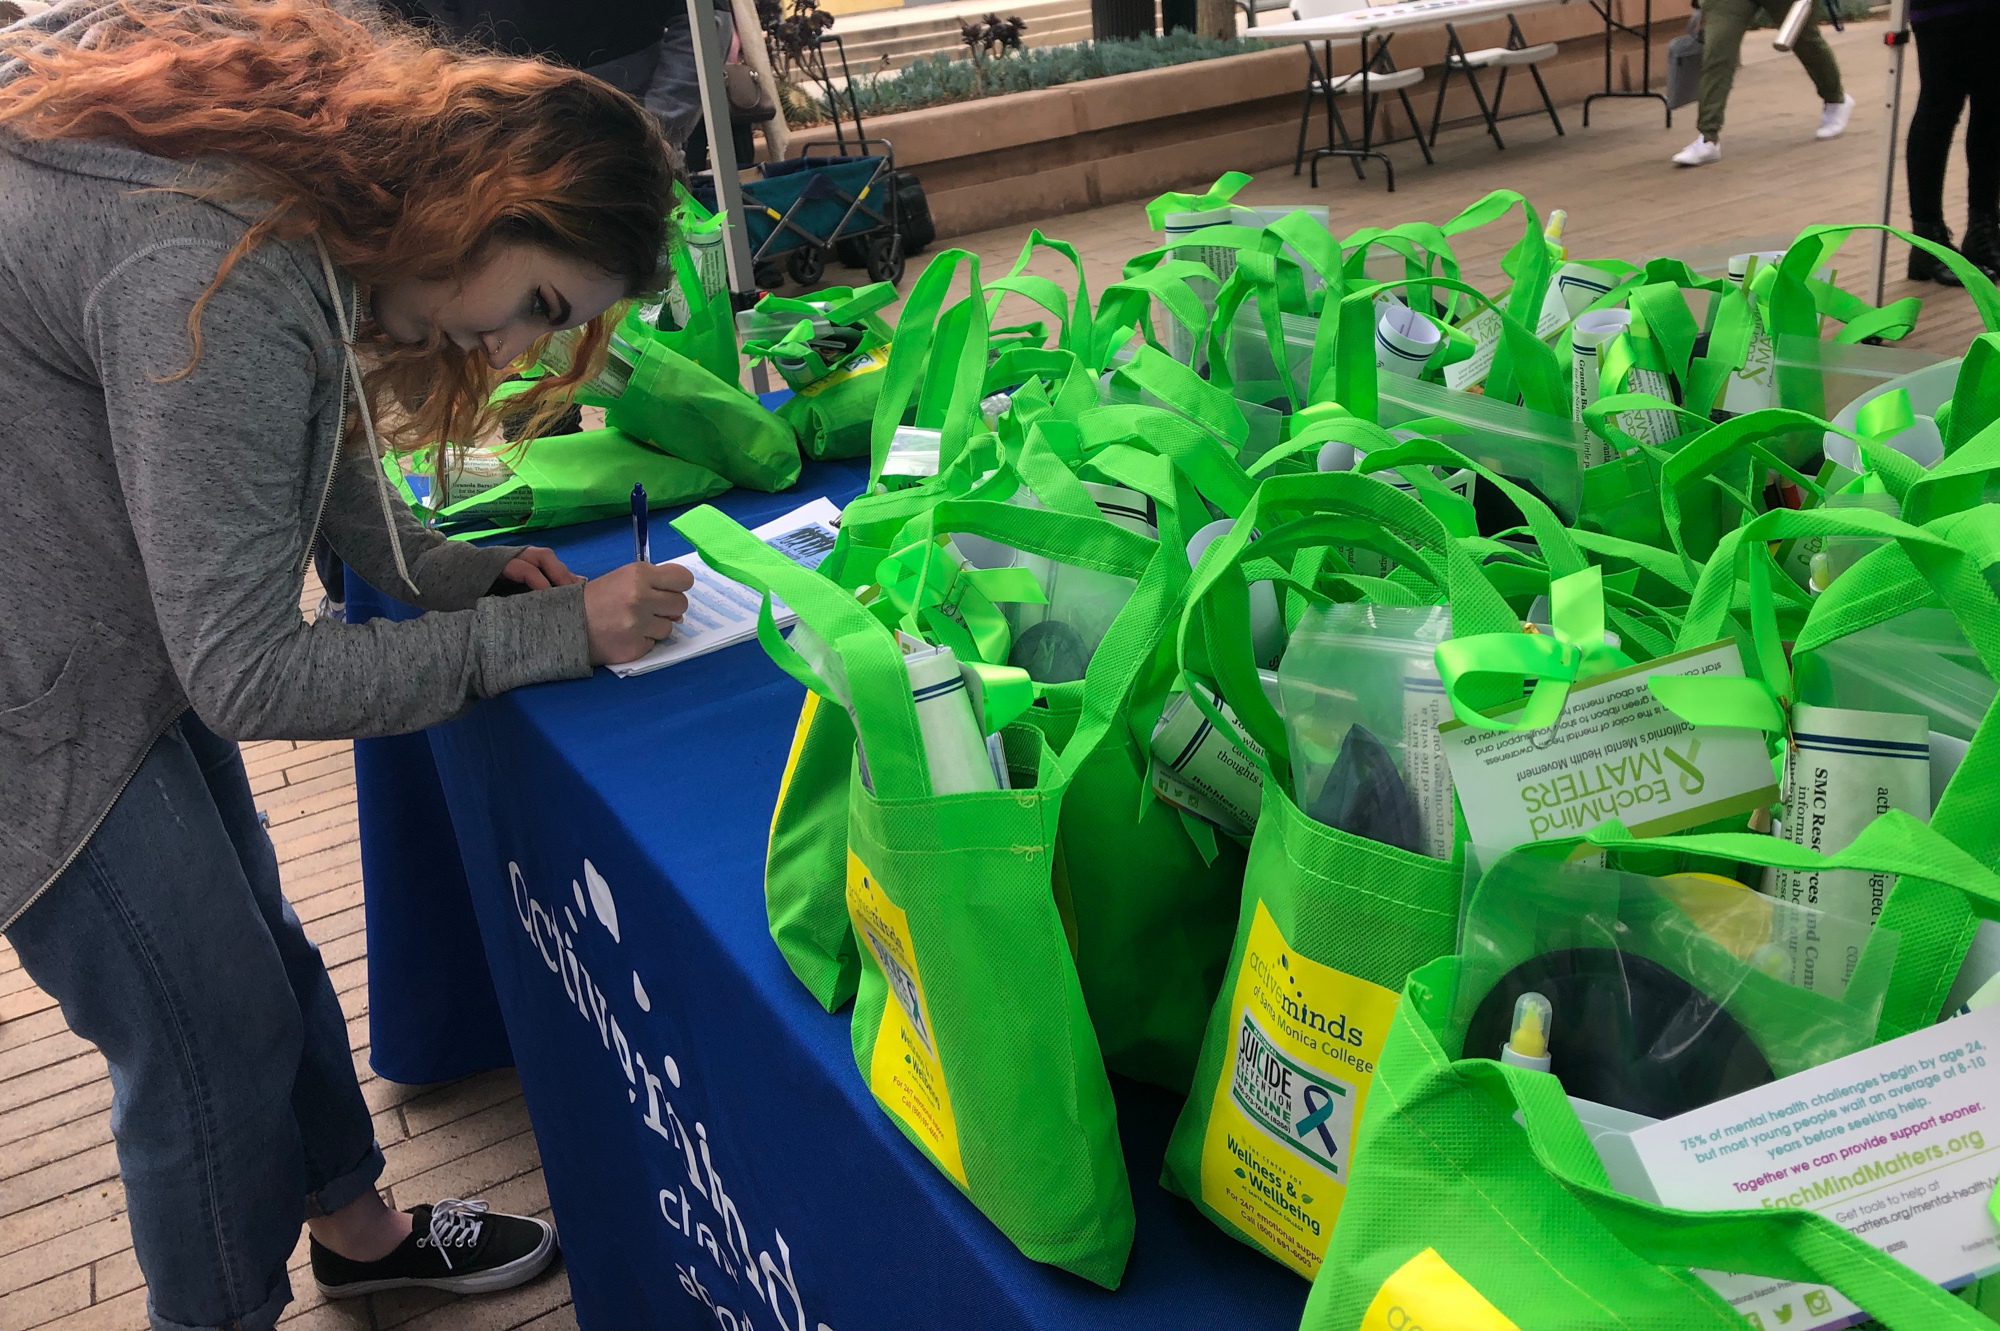  Student Skyler Stark signing up to get a free self-care kit, at Active Minds of SMC's event on Thursday, May 24th, 2018 at Santa Monica College, in Santa Monica, California. (Jennifer Nystrom/Corsair Photo) 